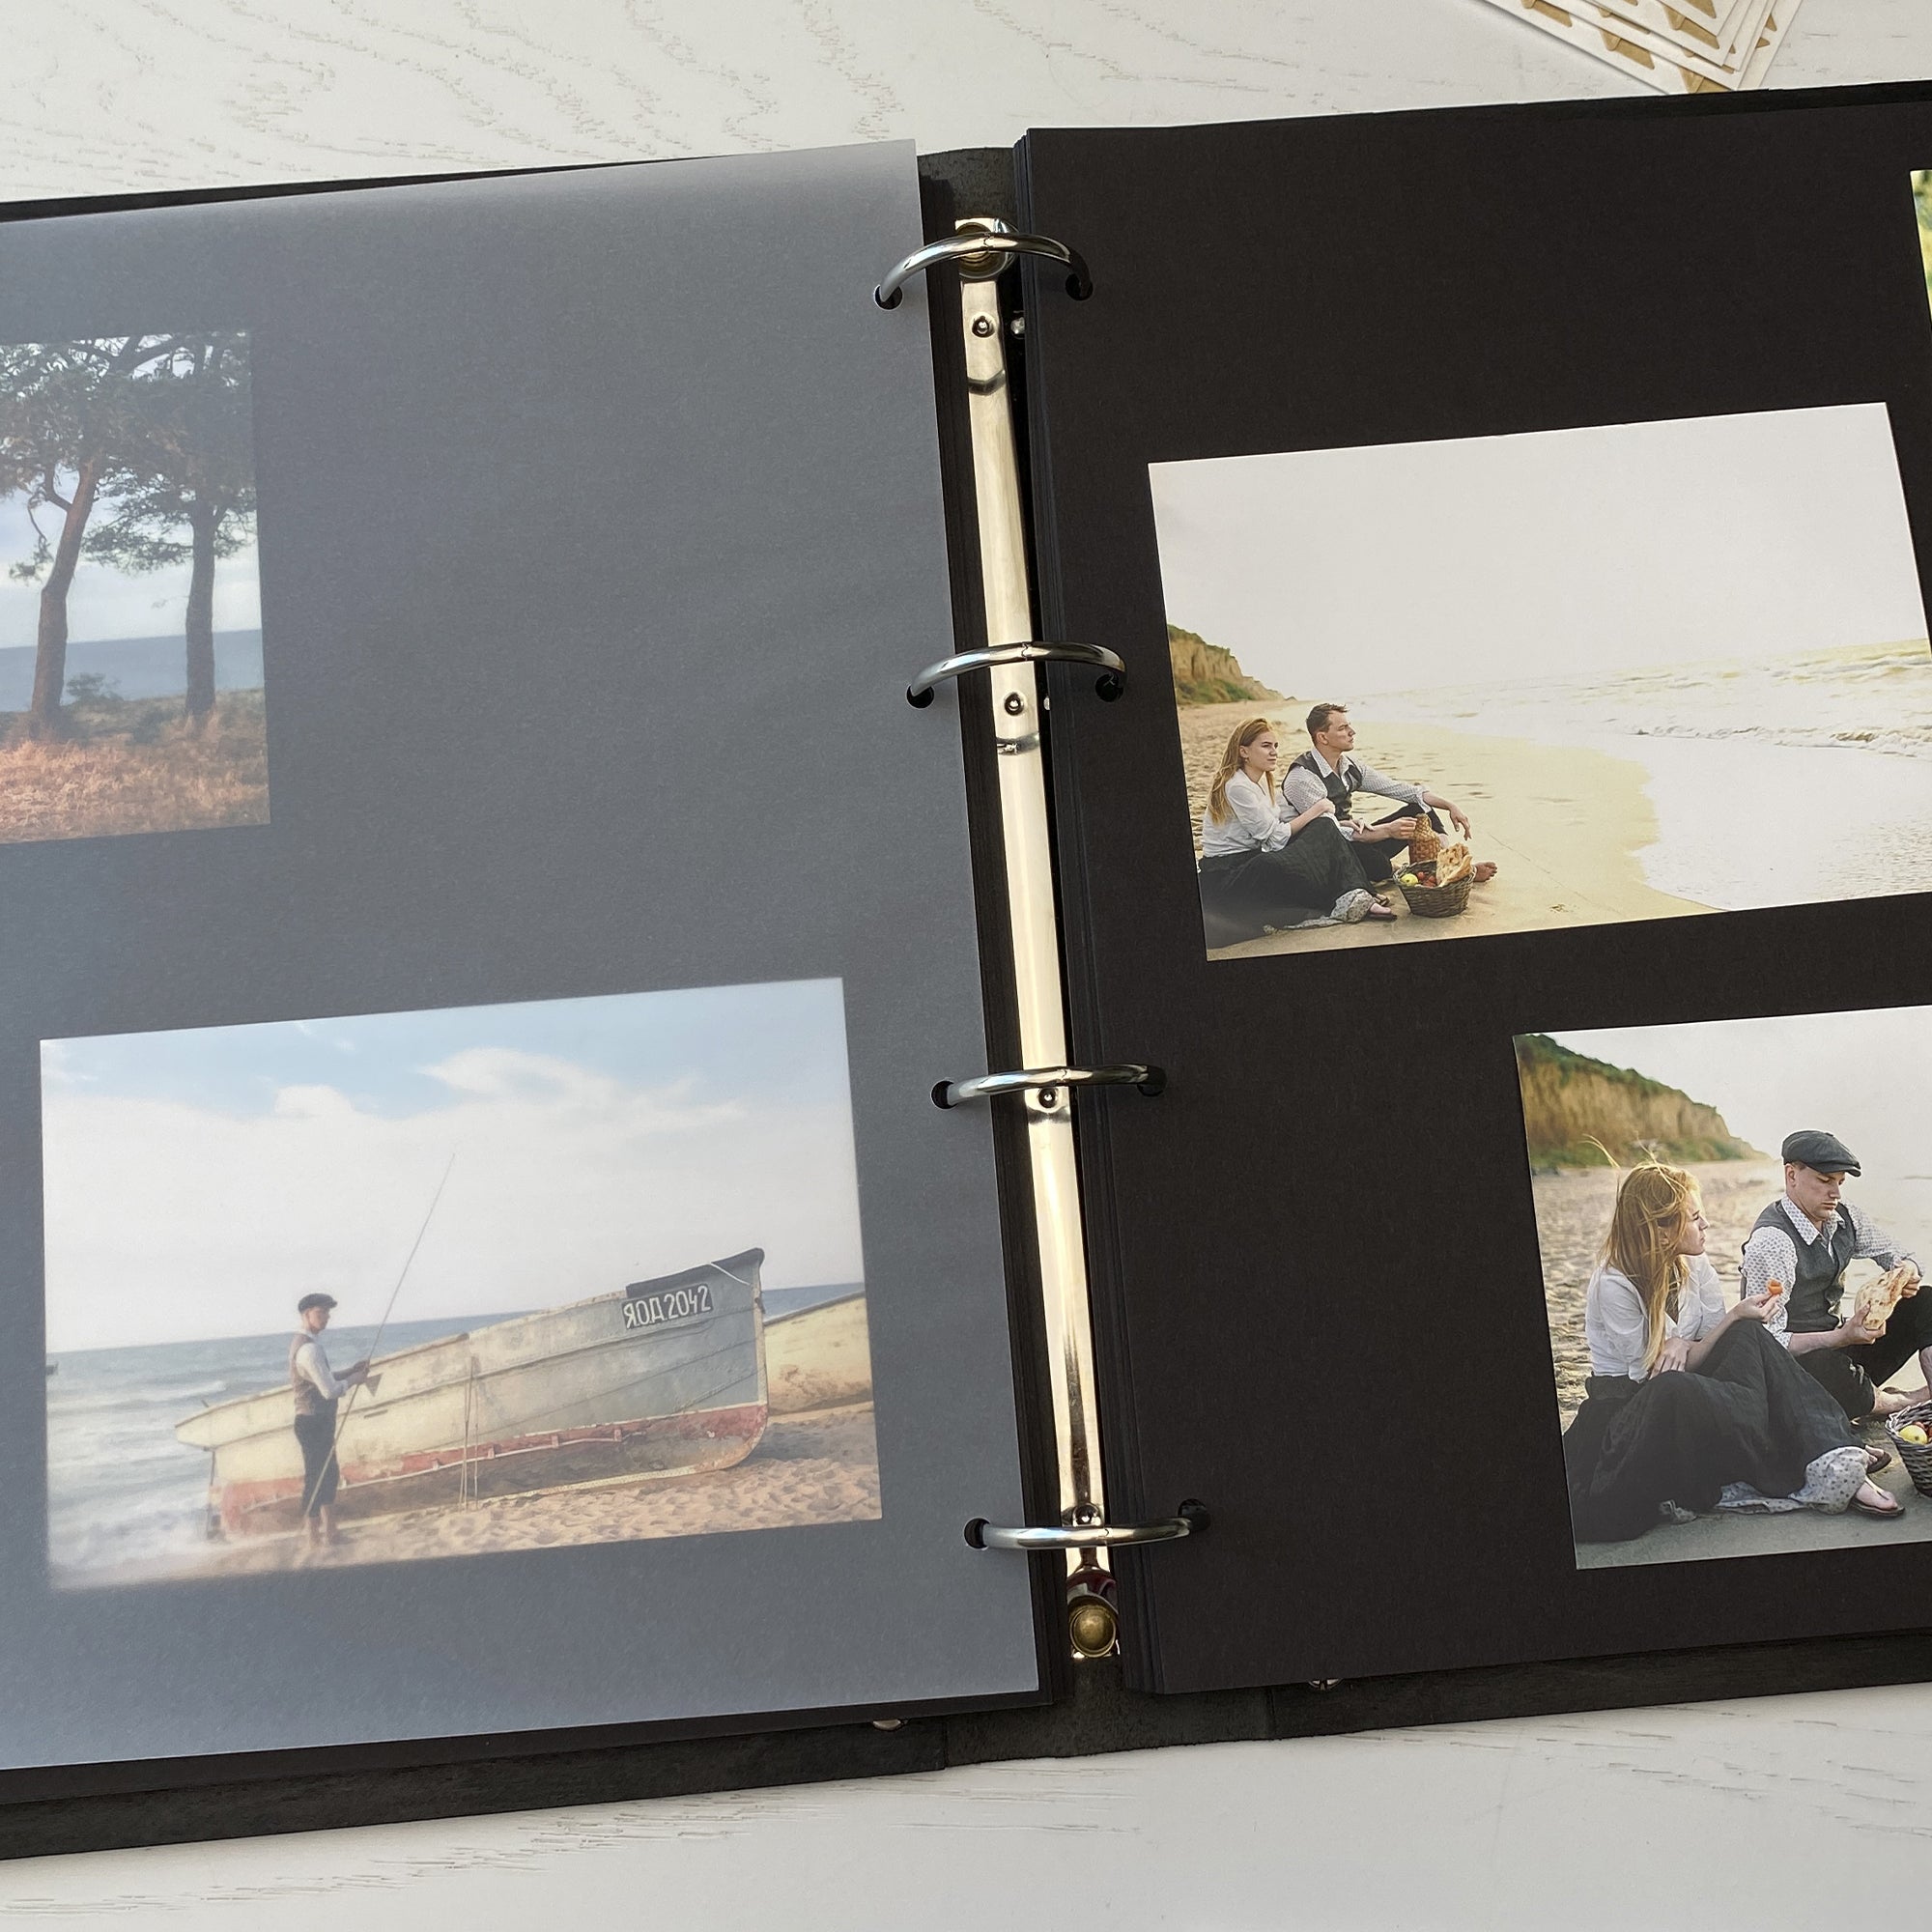 Personalized photo album with leather cover and My World engraving